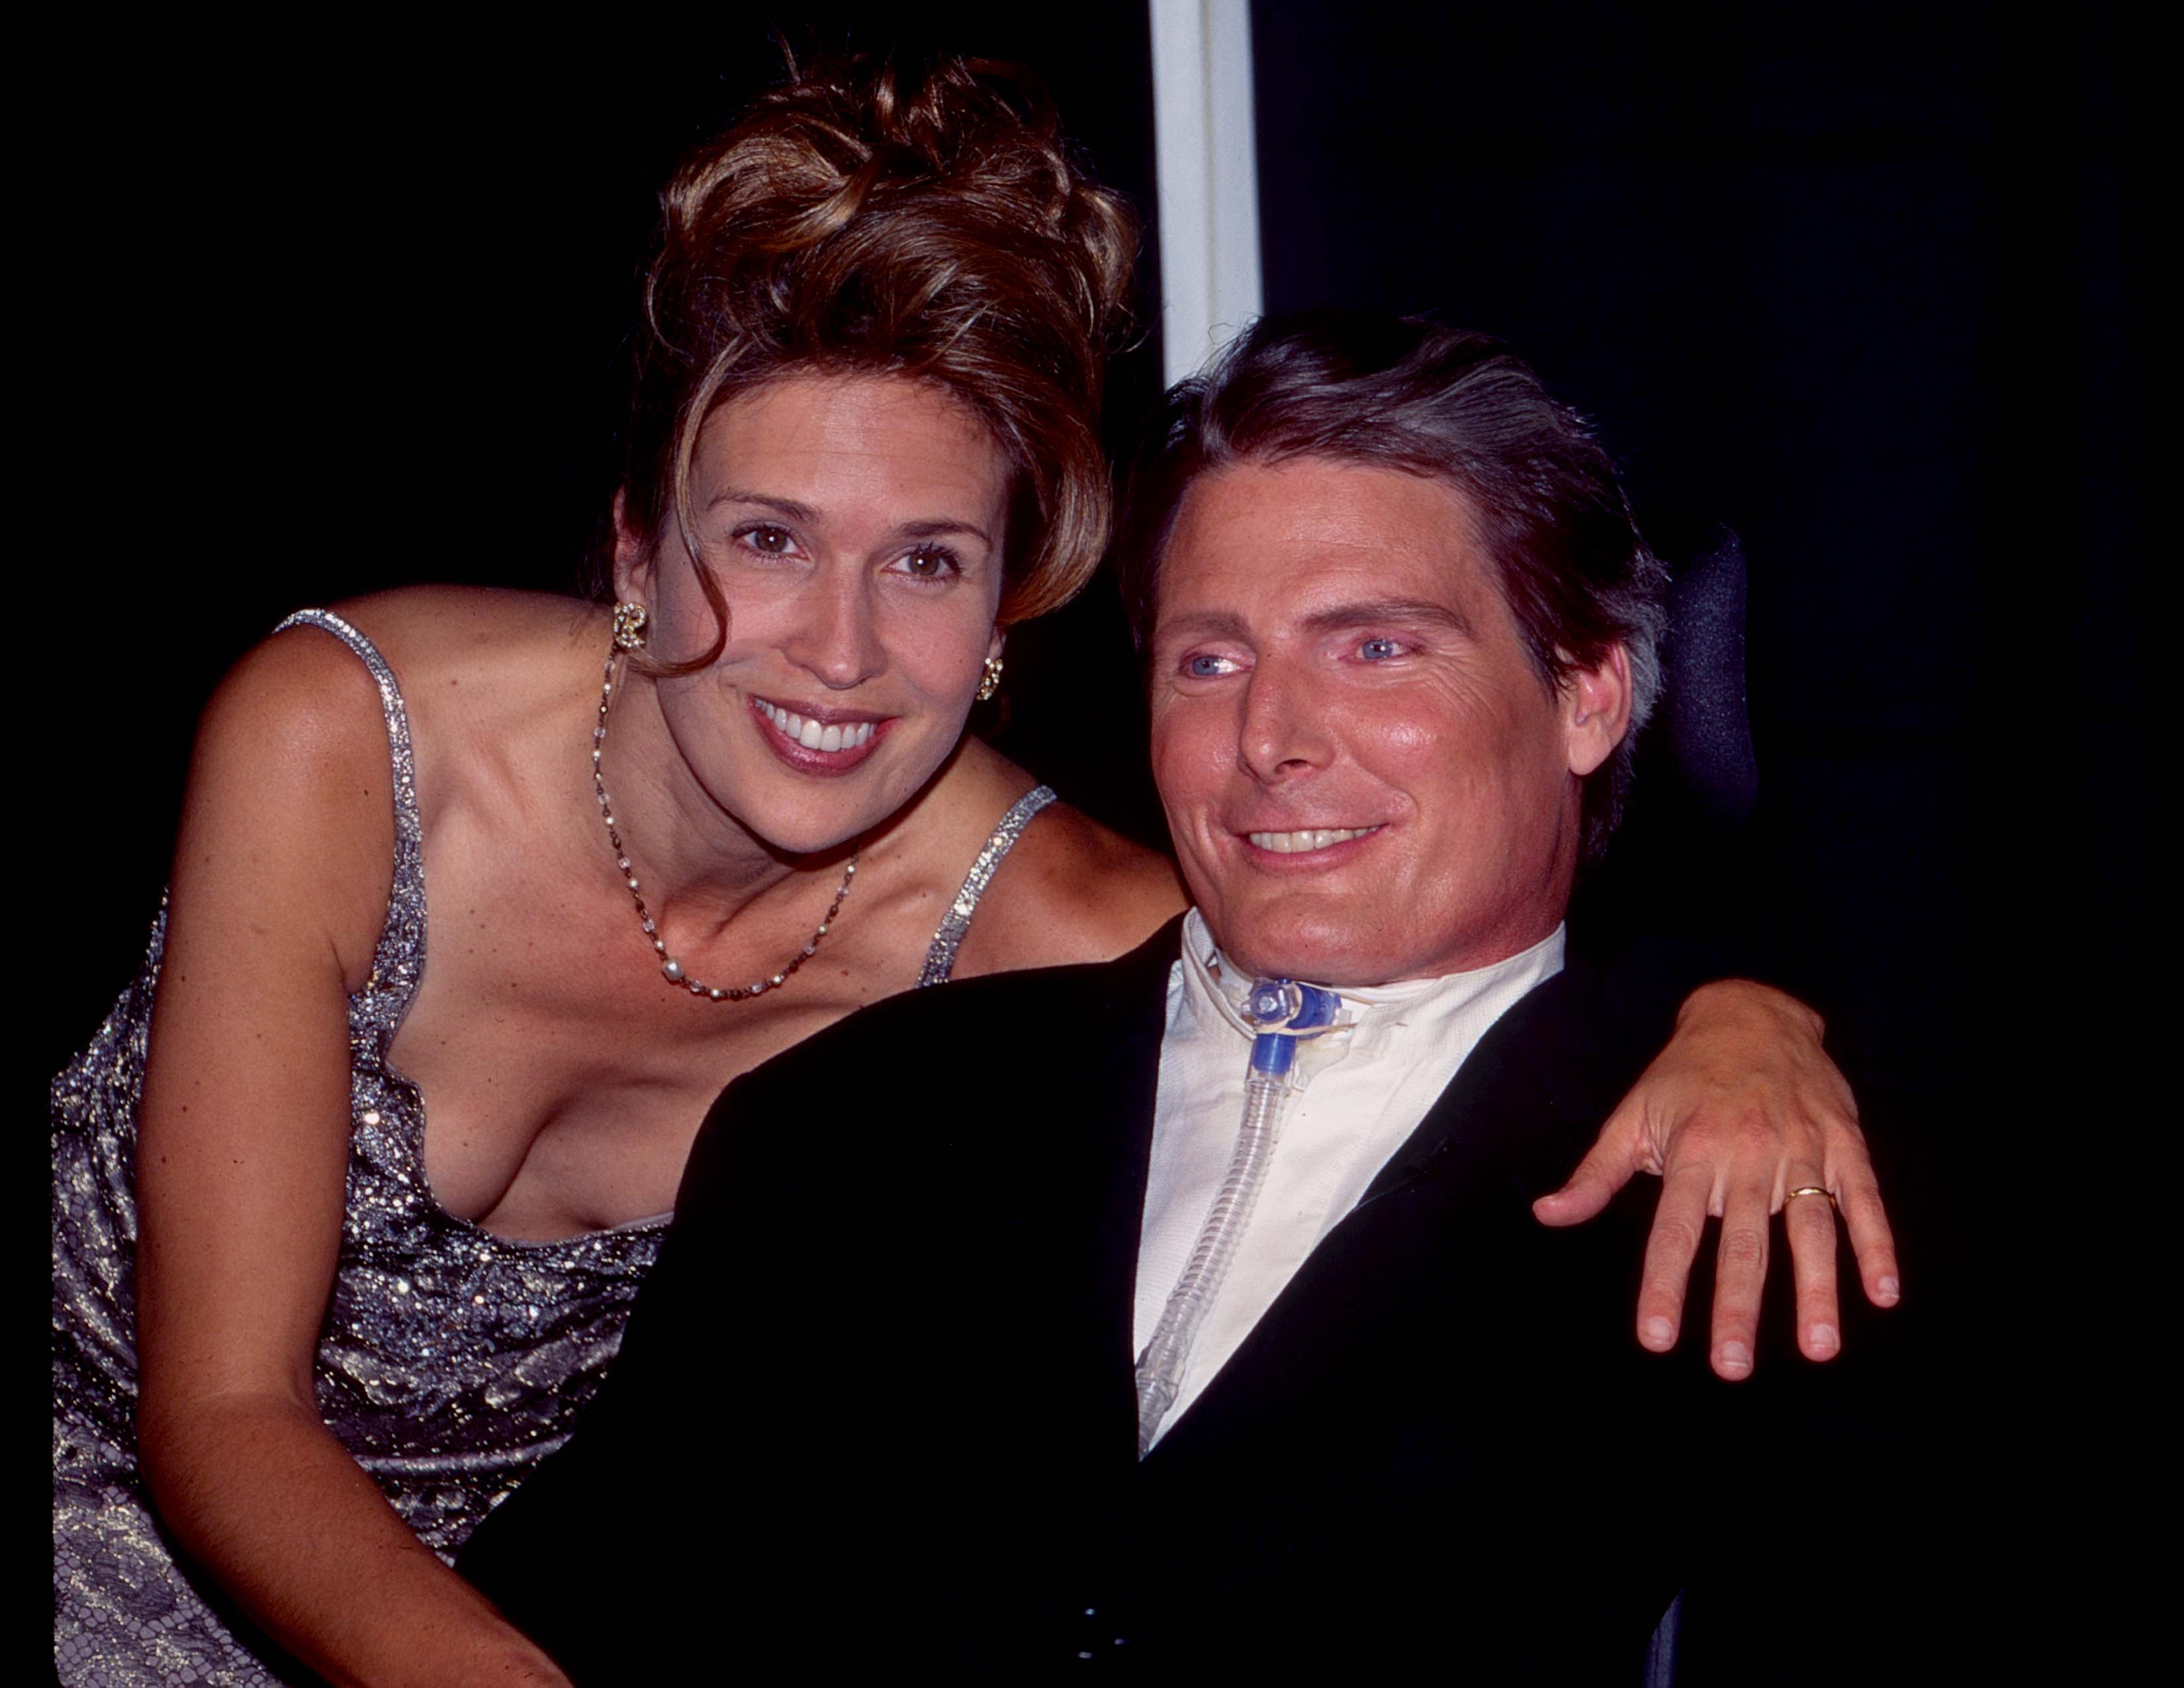 Dana and Christopher Reeve at the second annual GQ Men of the Year Awards on January 15, 1997, in New York. | Source: Getty Images